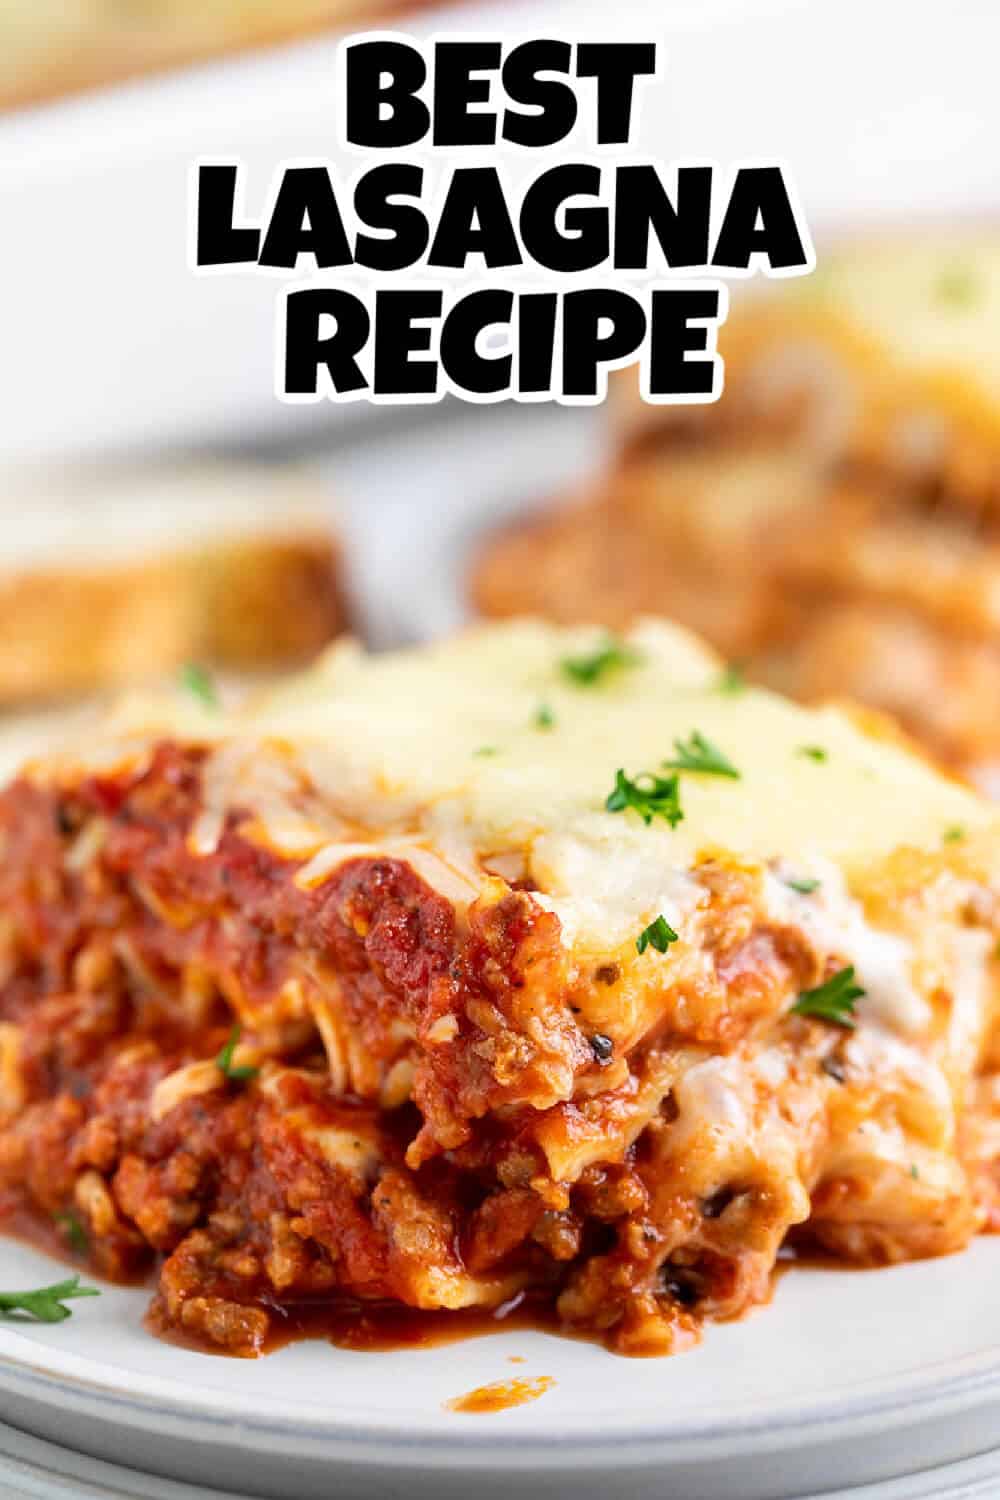 Lasagna Recipe Without Ricotta or Cottage Cheese